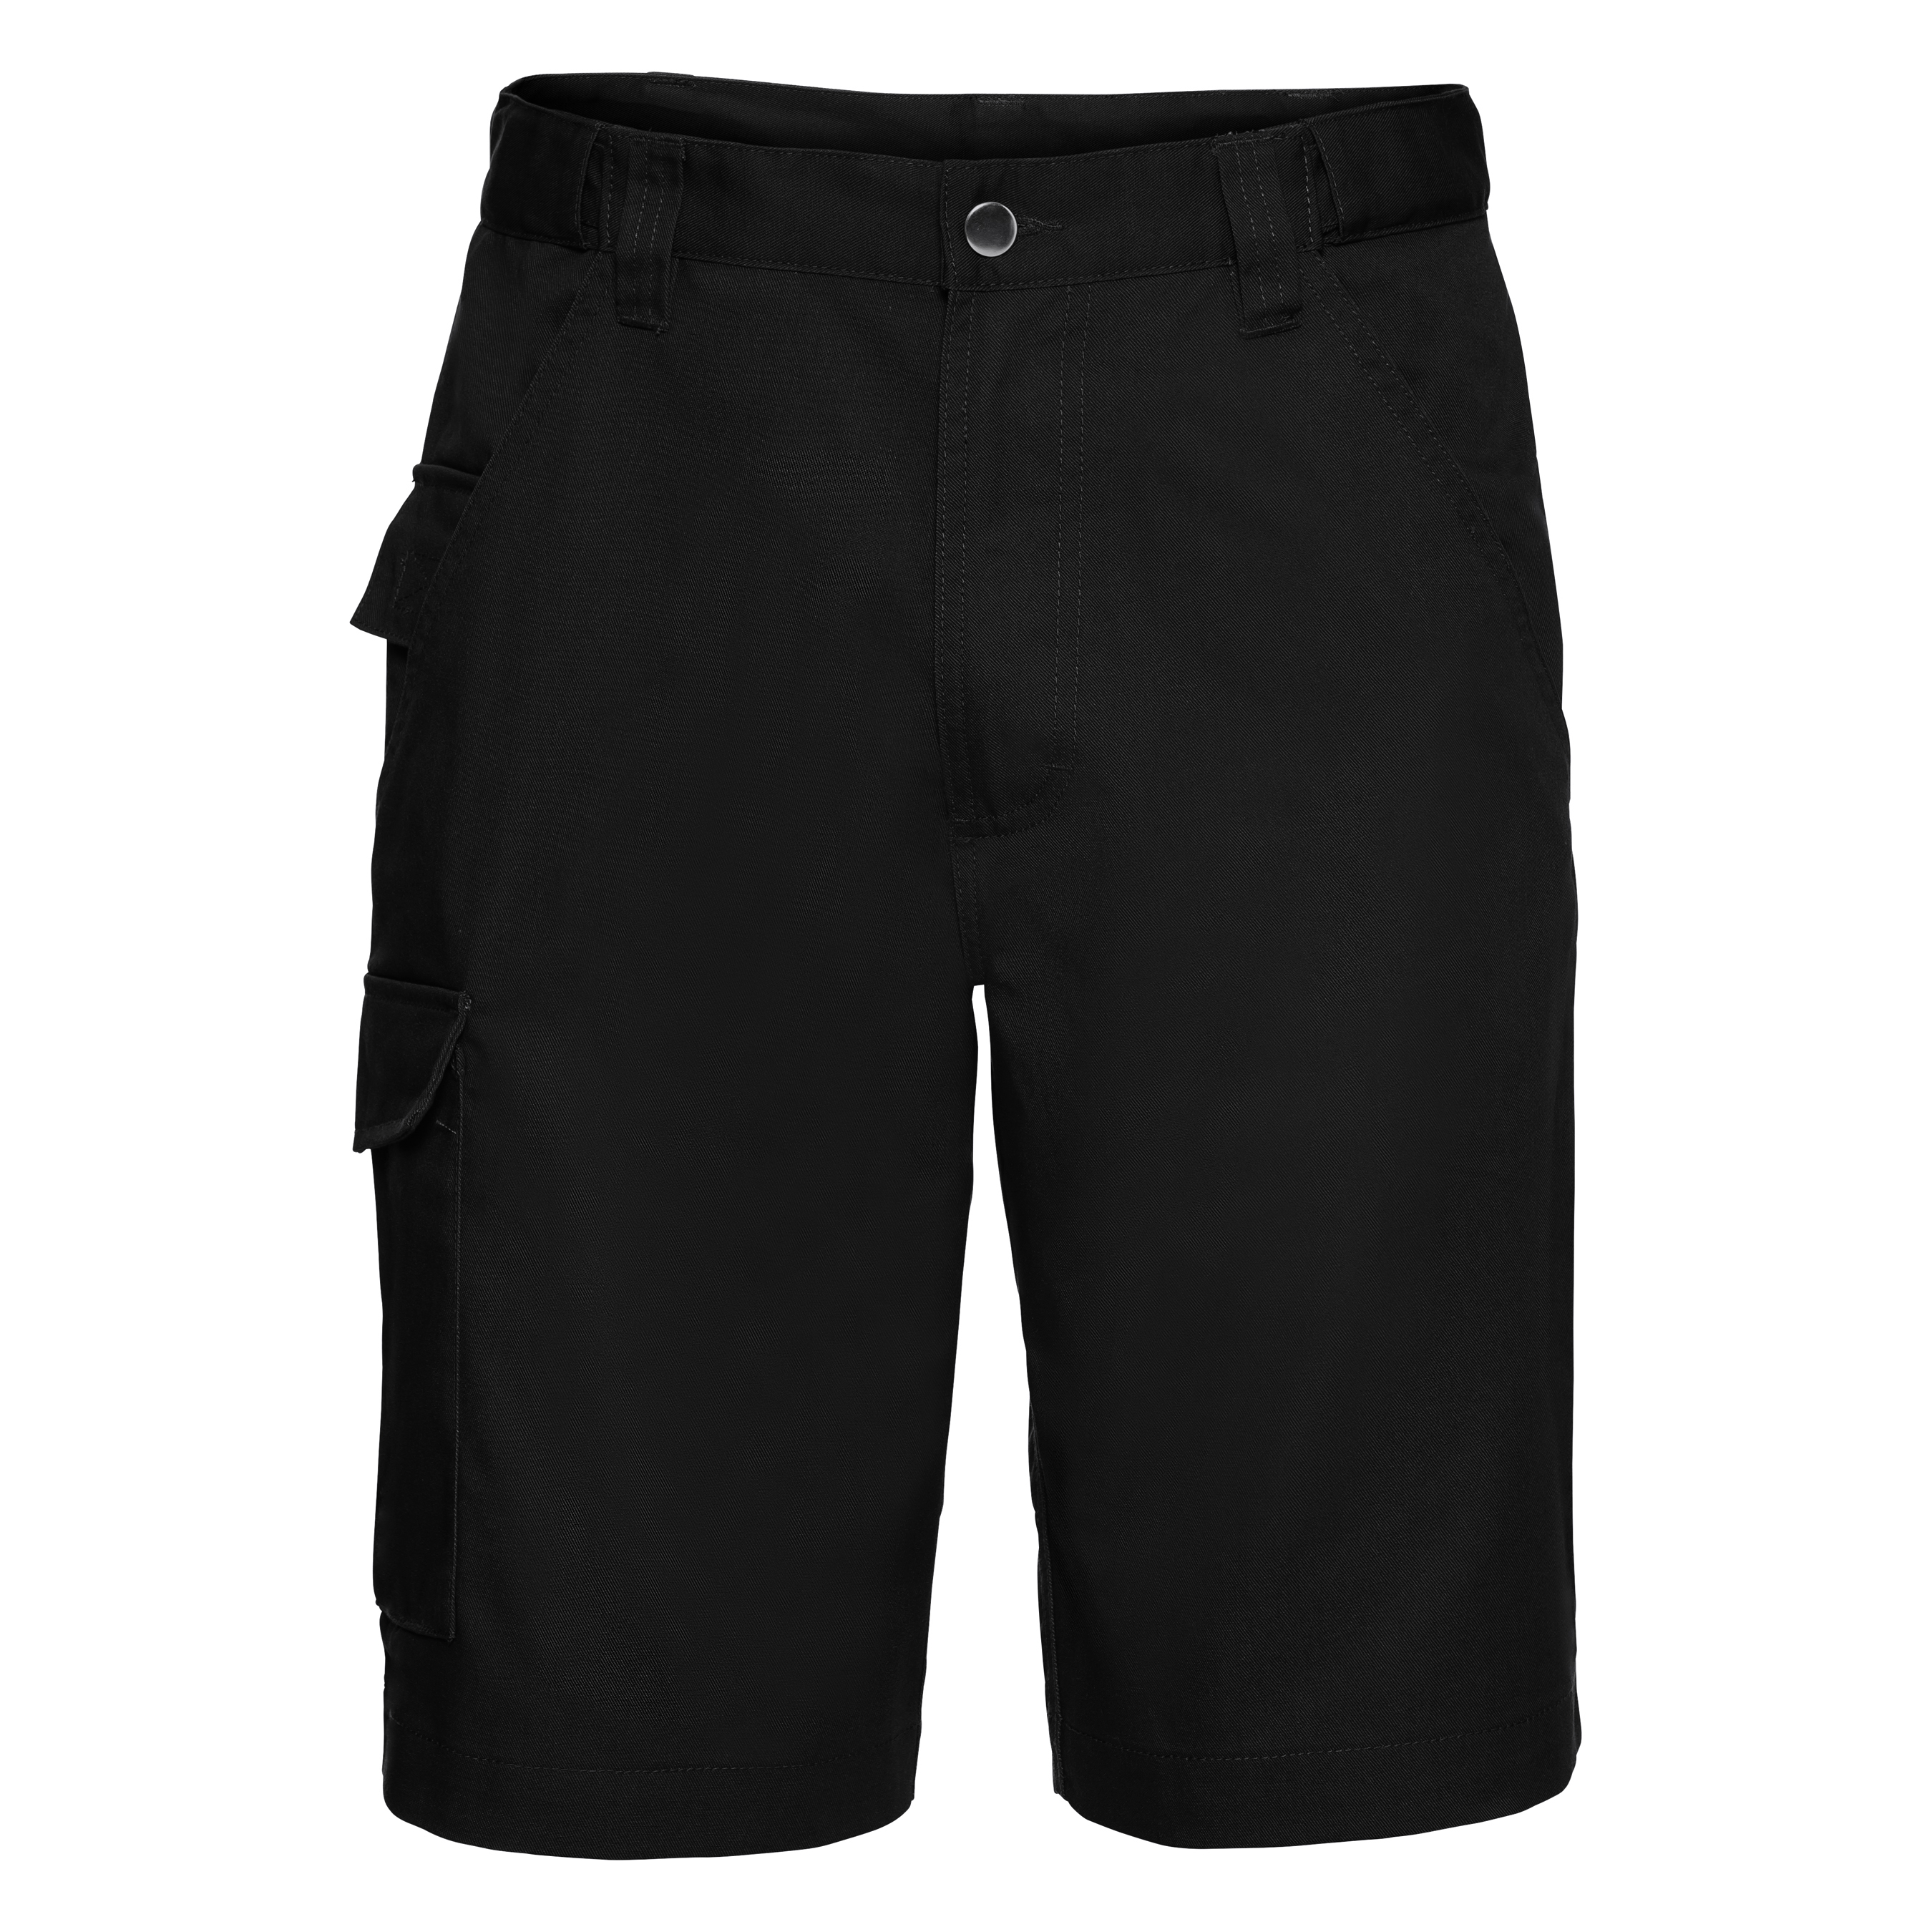 ax-httpswebsystems.s3.amazonaws.comtmp_for_downloadrussell-polycotton-twill-workwear-shorts-black.jpeg.jpg